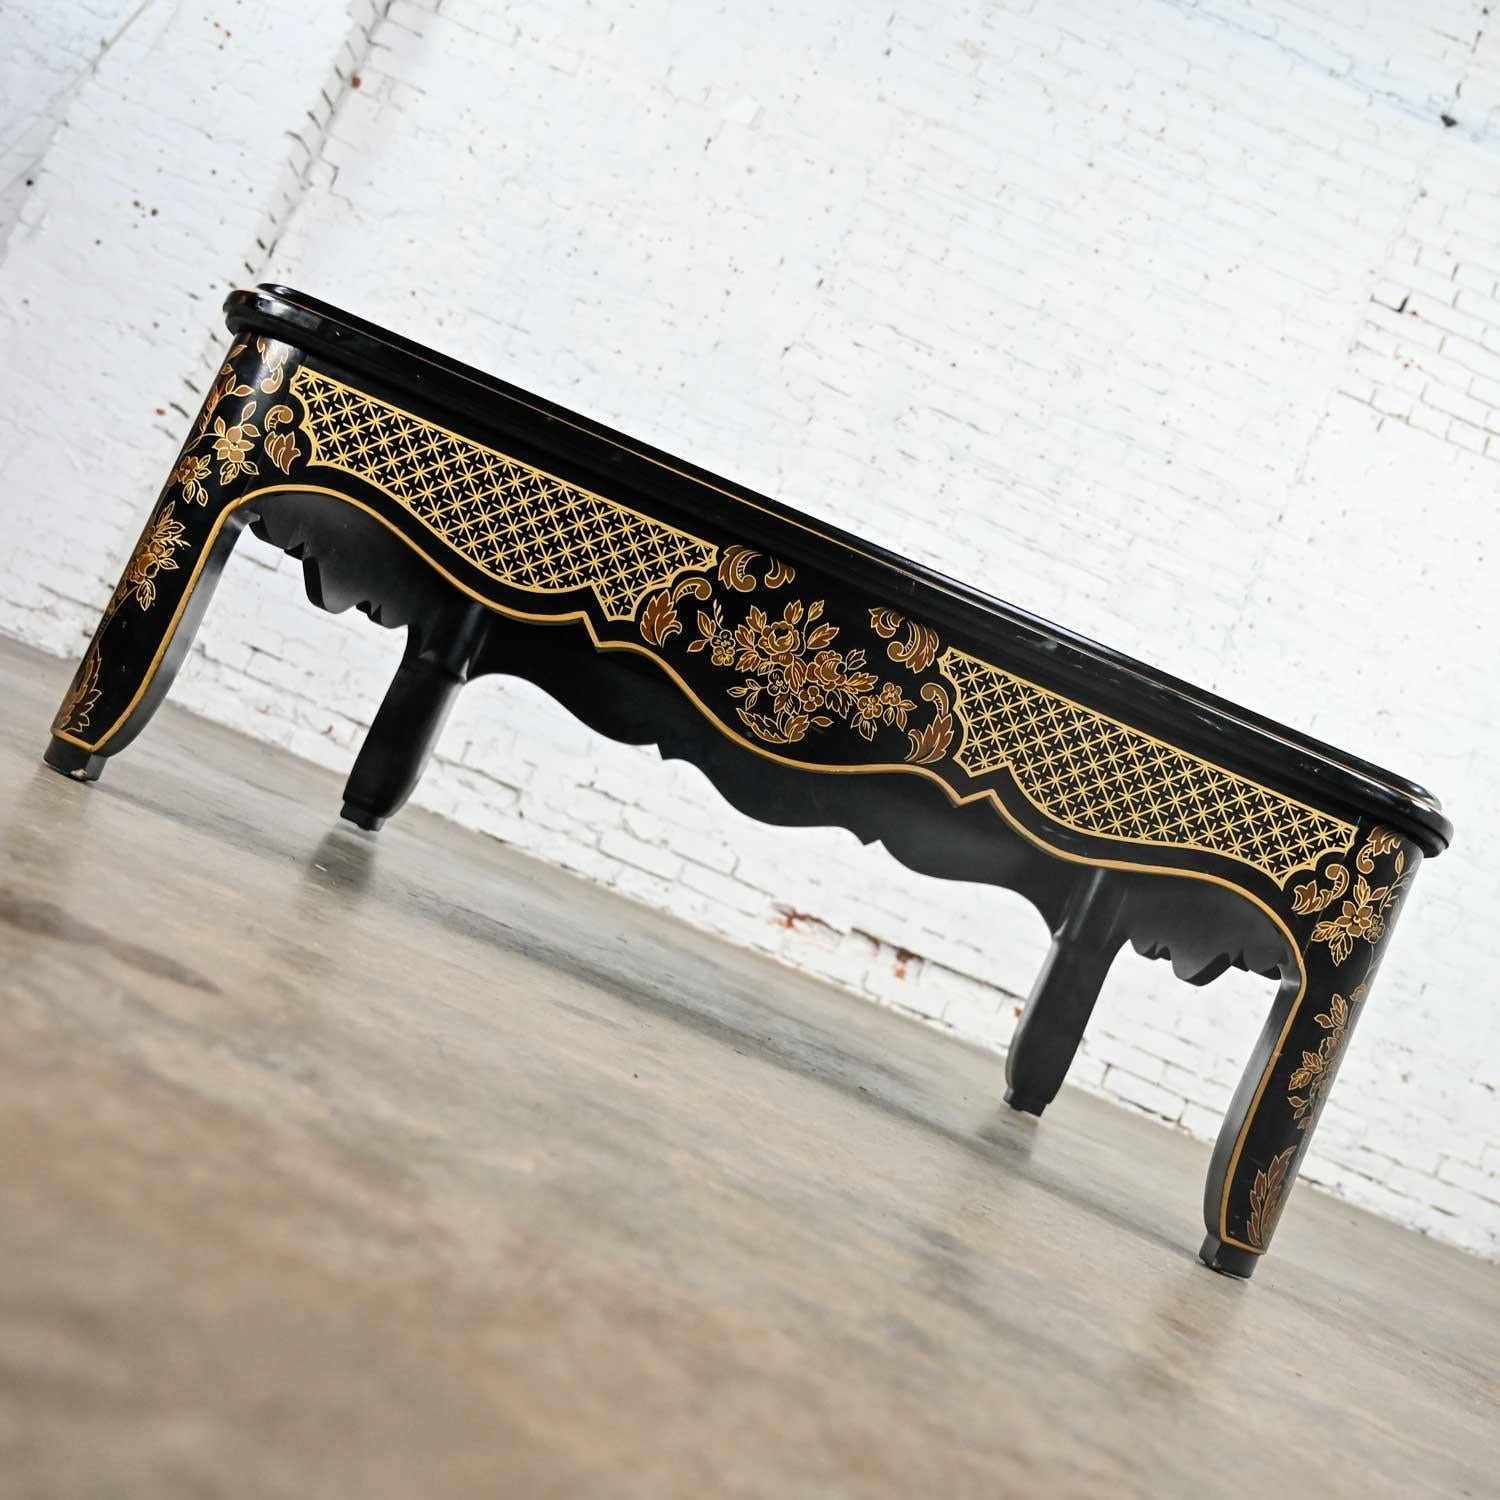 Drexel Heritage ET Cetera Collection Chinoiserie Black Gold Burl Coffee Table For Sale 1